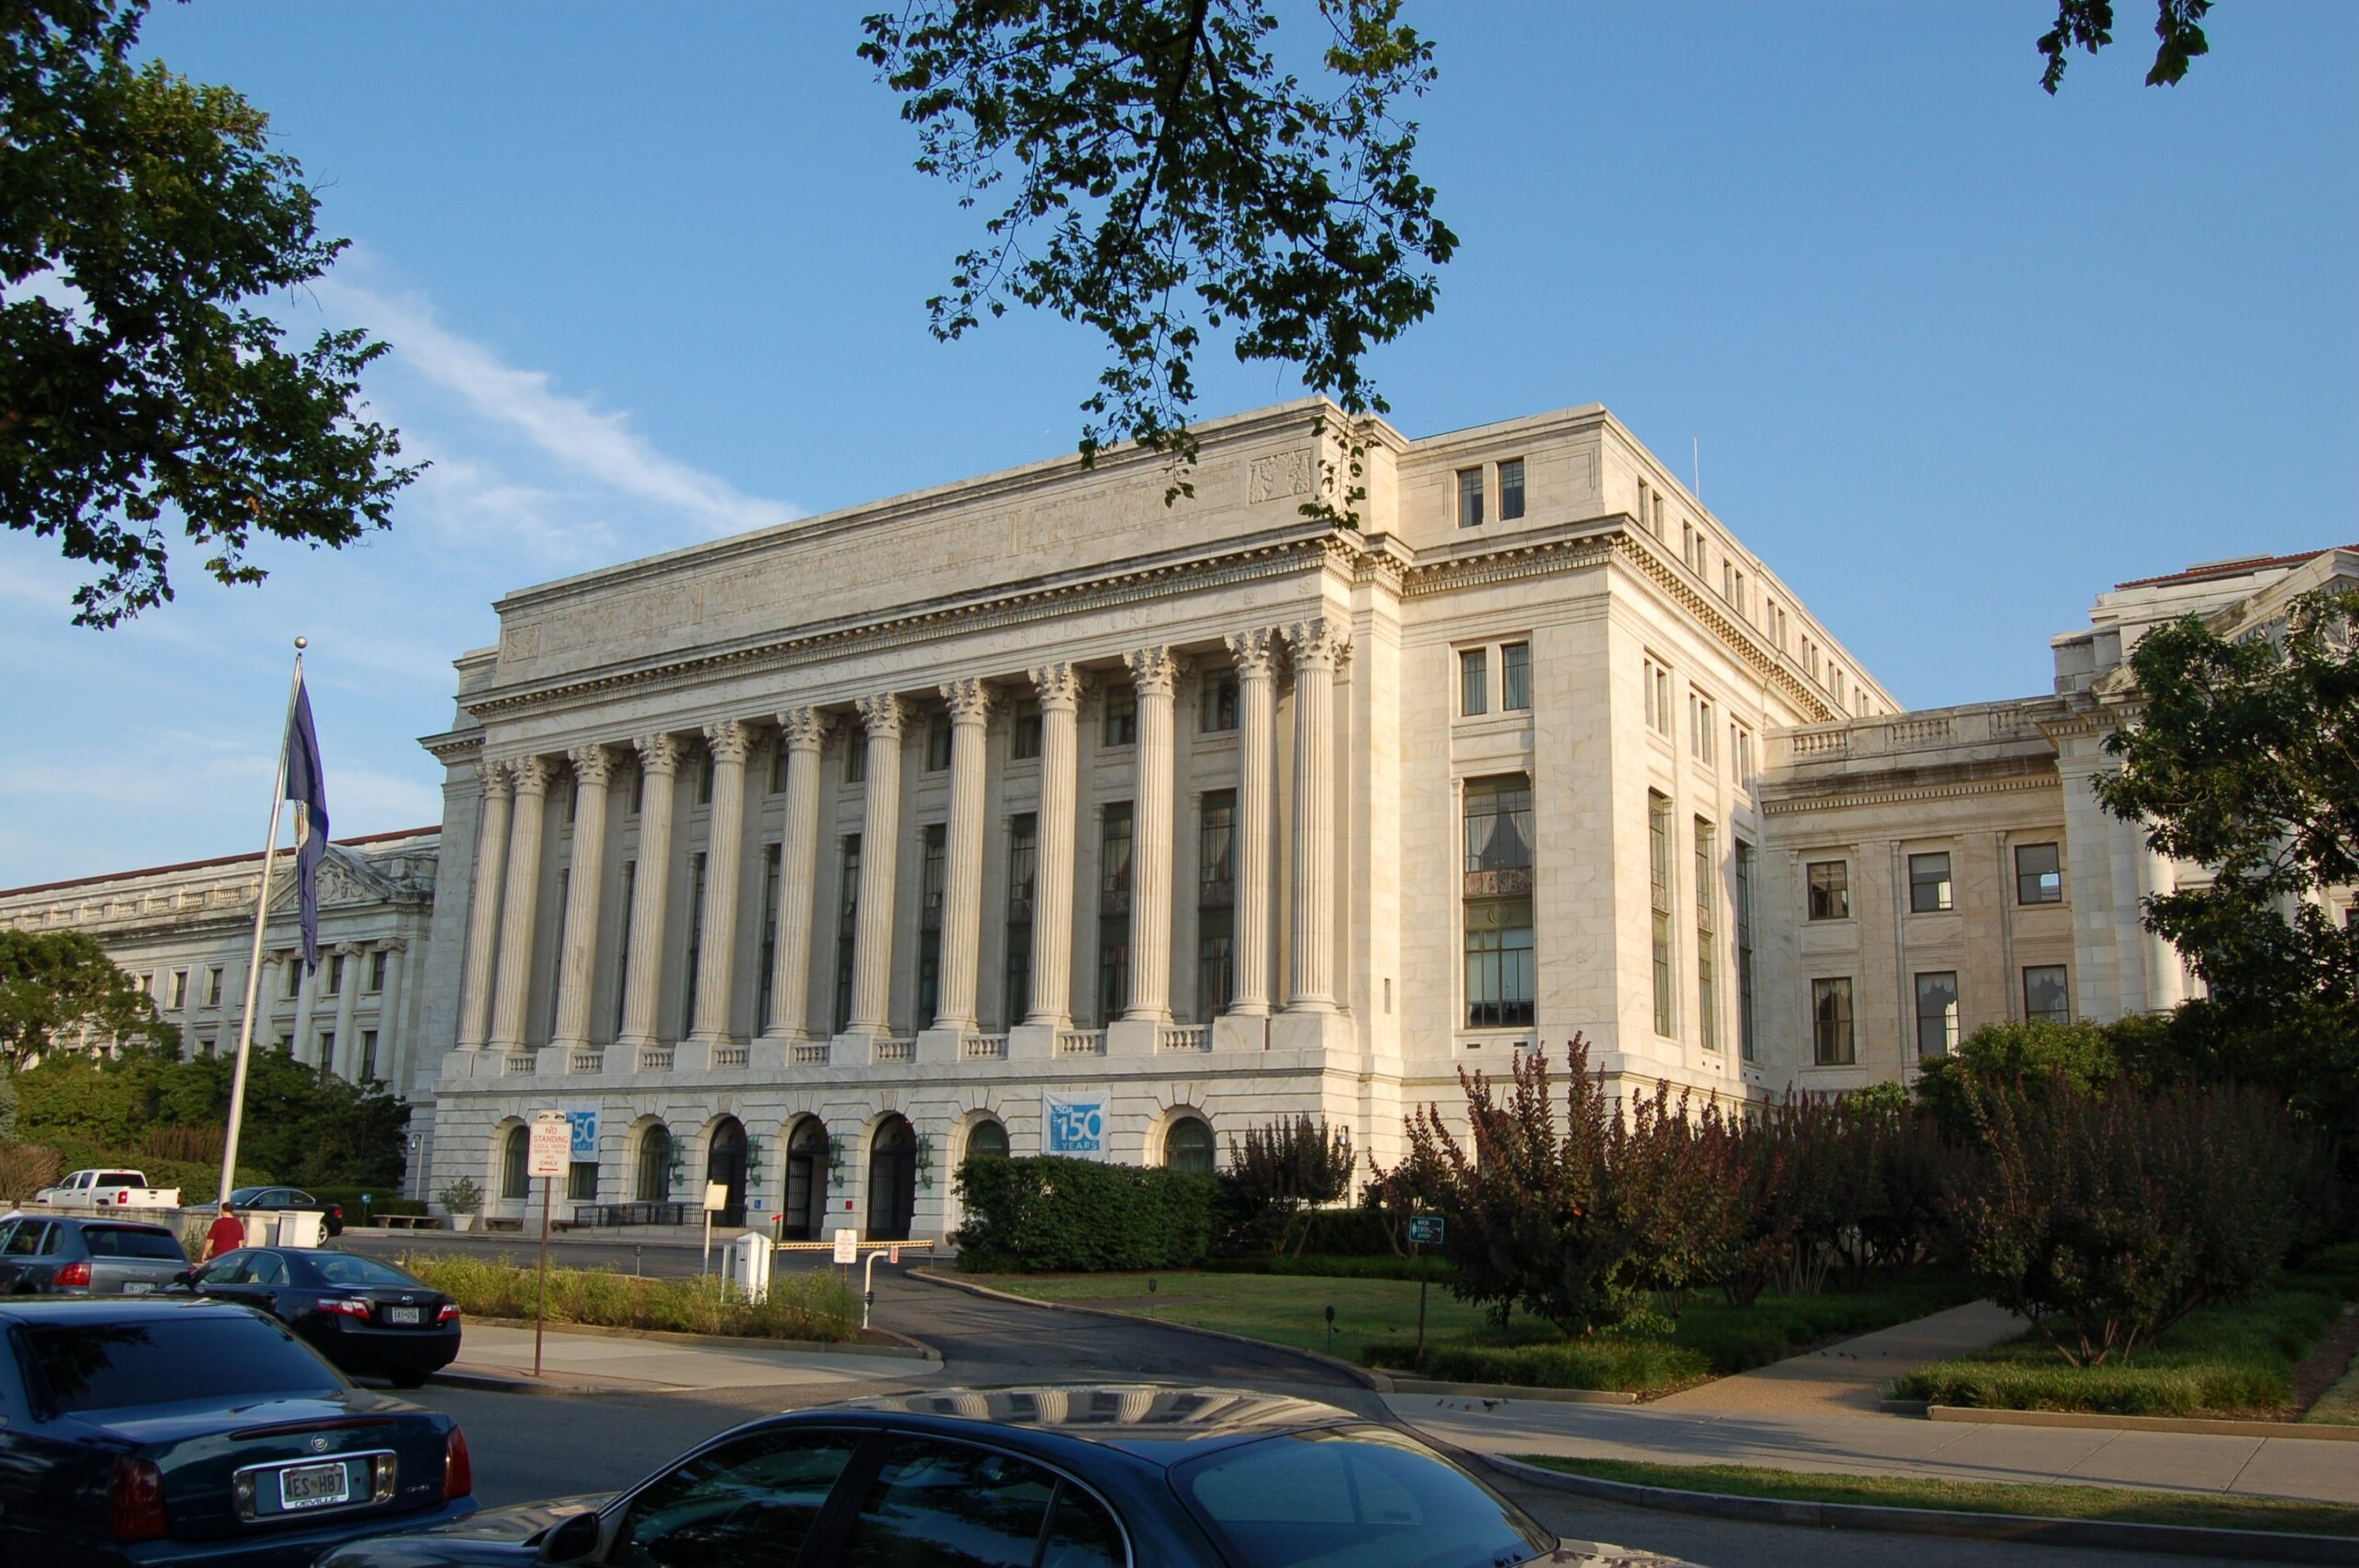 The US Department of Agriculture building.